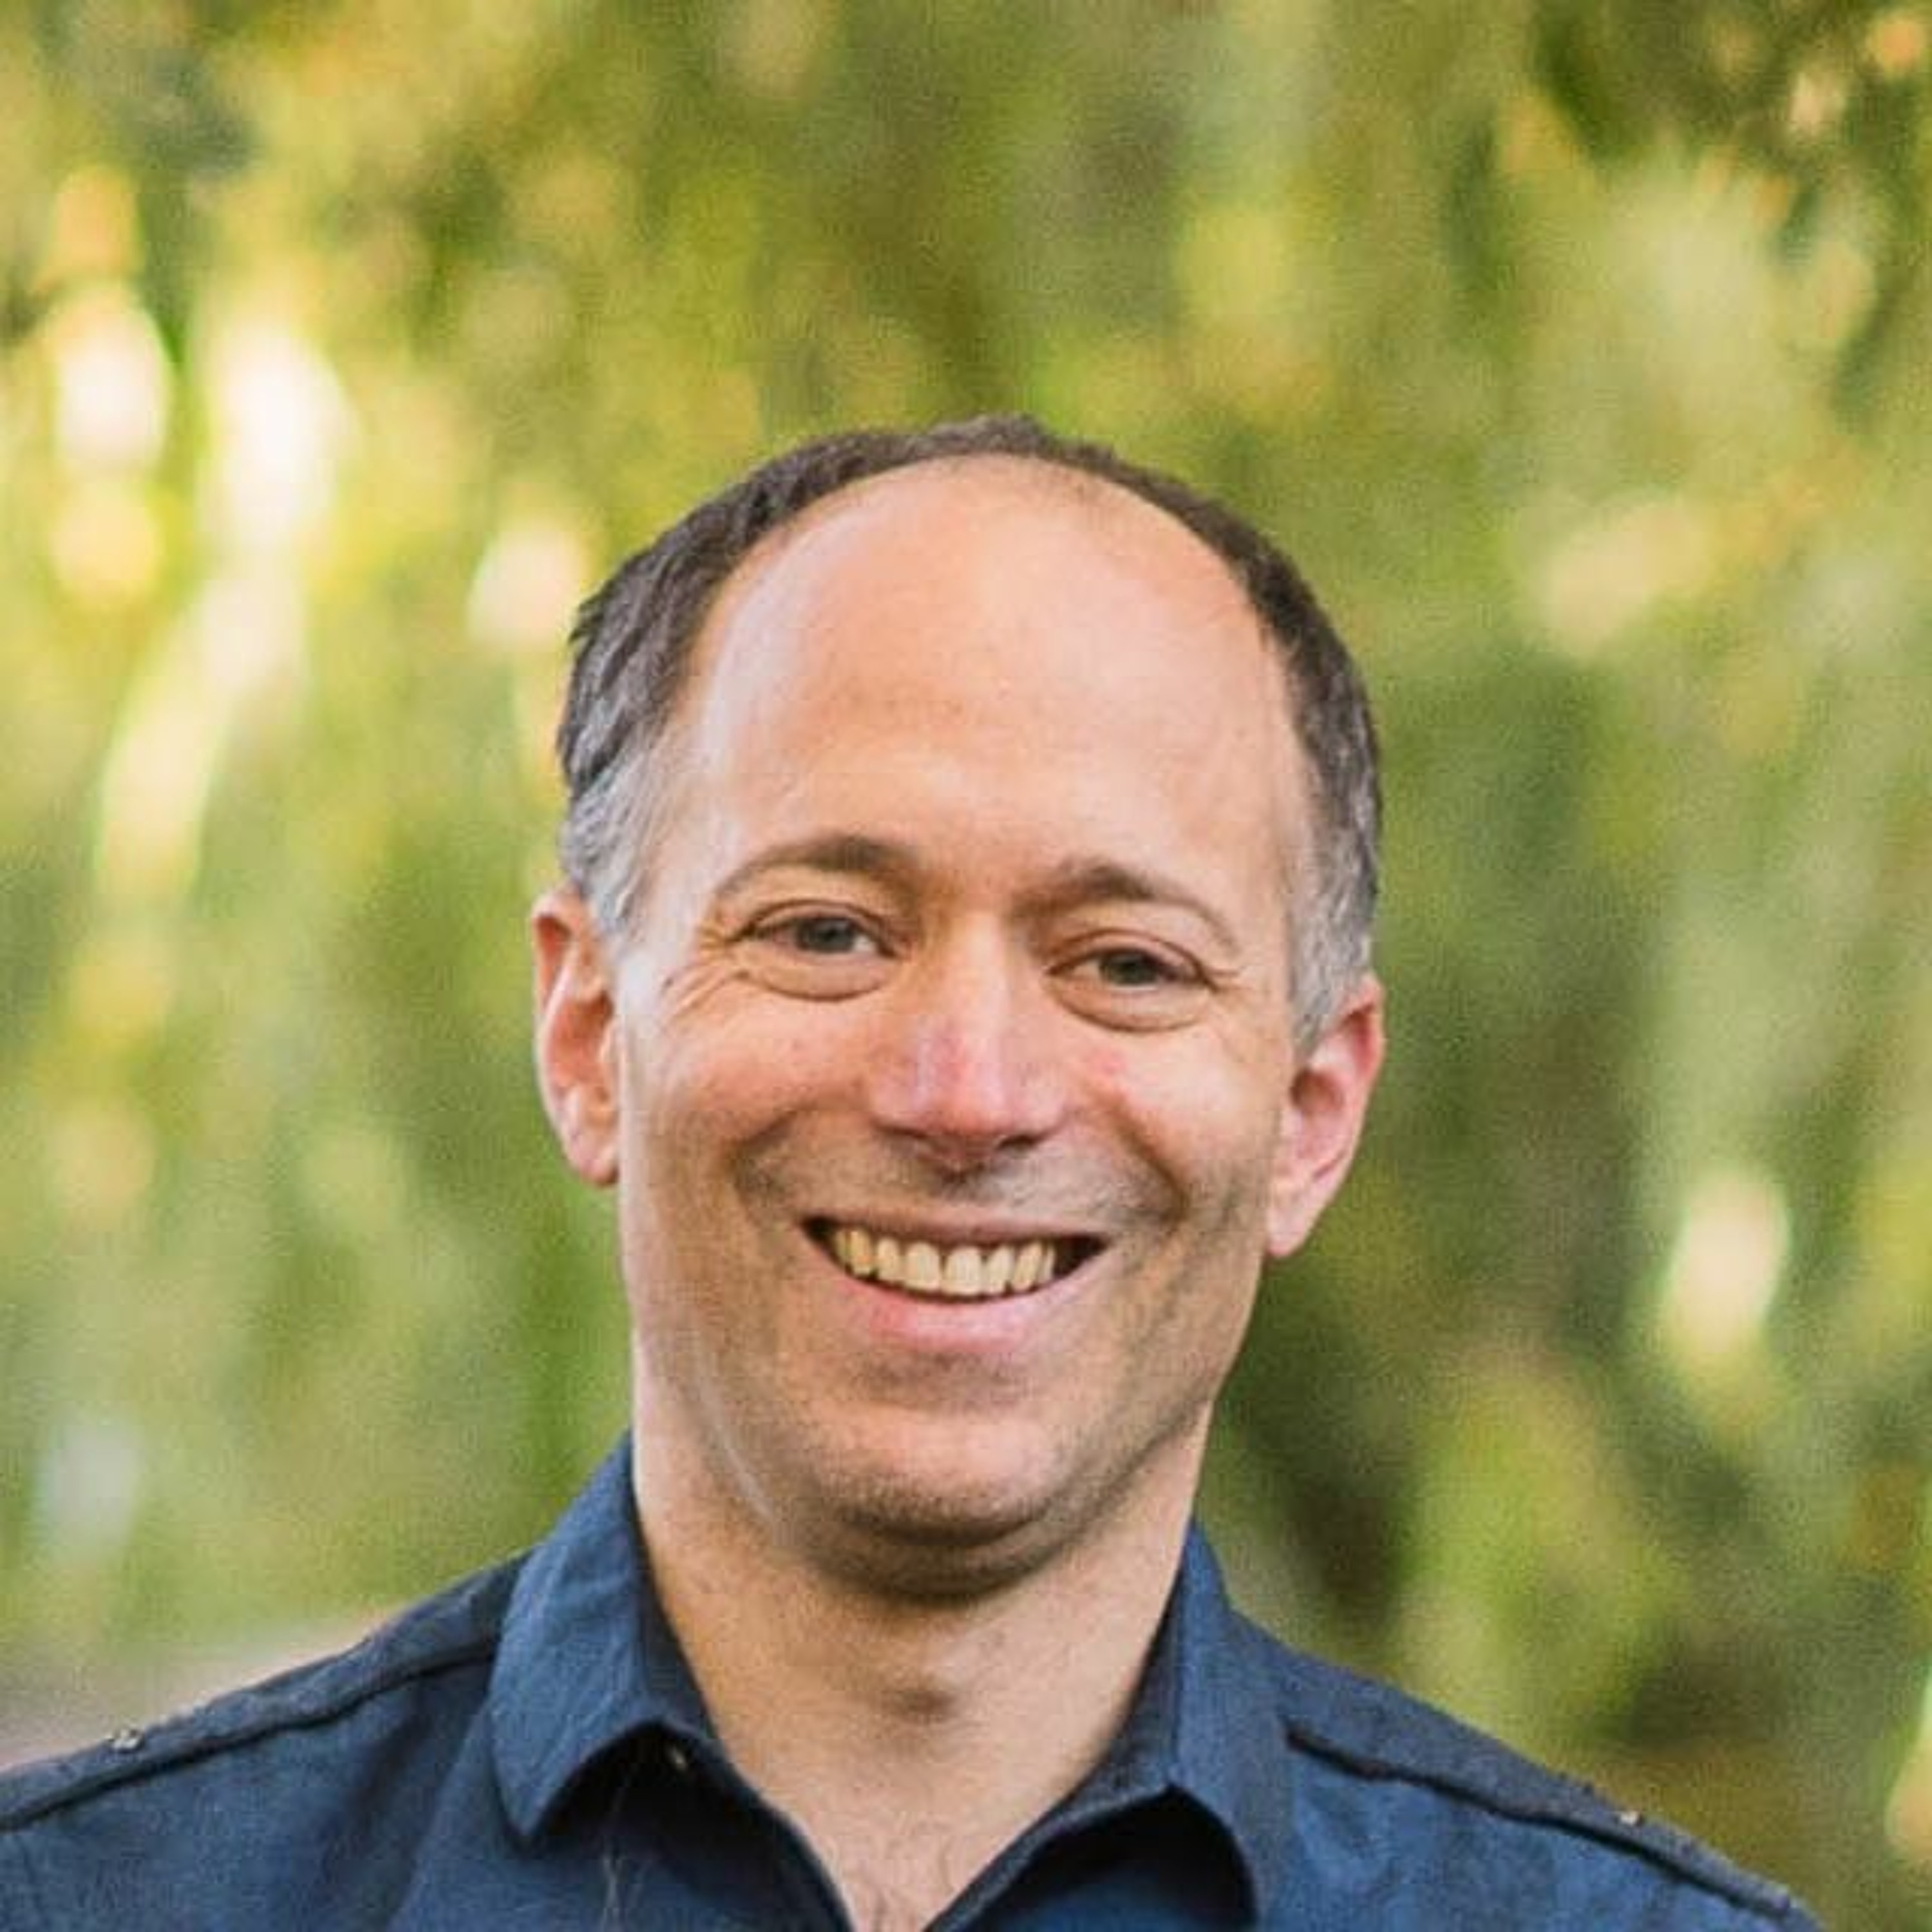 NVIDIA Research’s Aaron Lefohn on What’s Next at Intersection of AI and Computer Graphics – Ep. 125